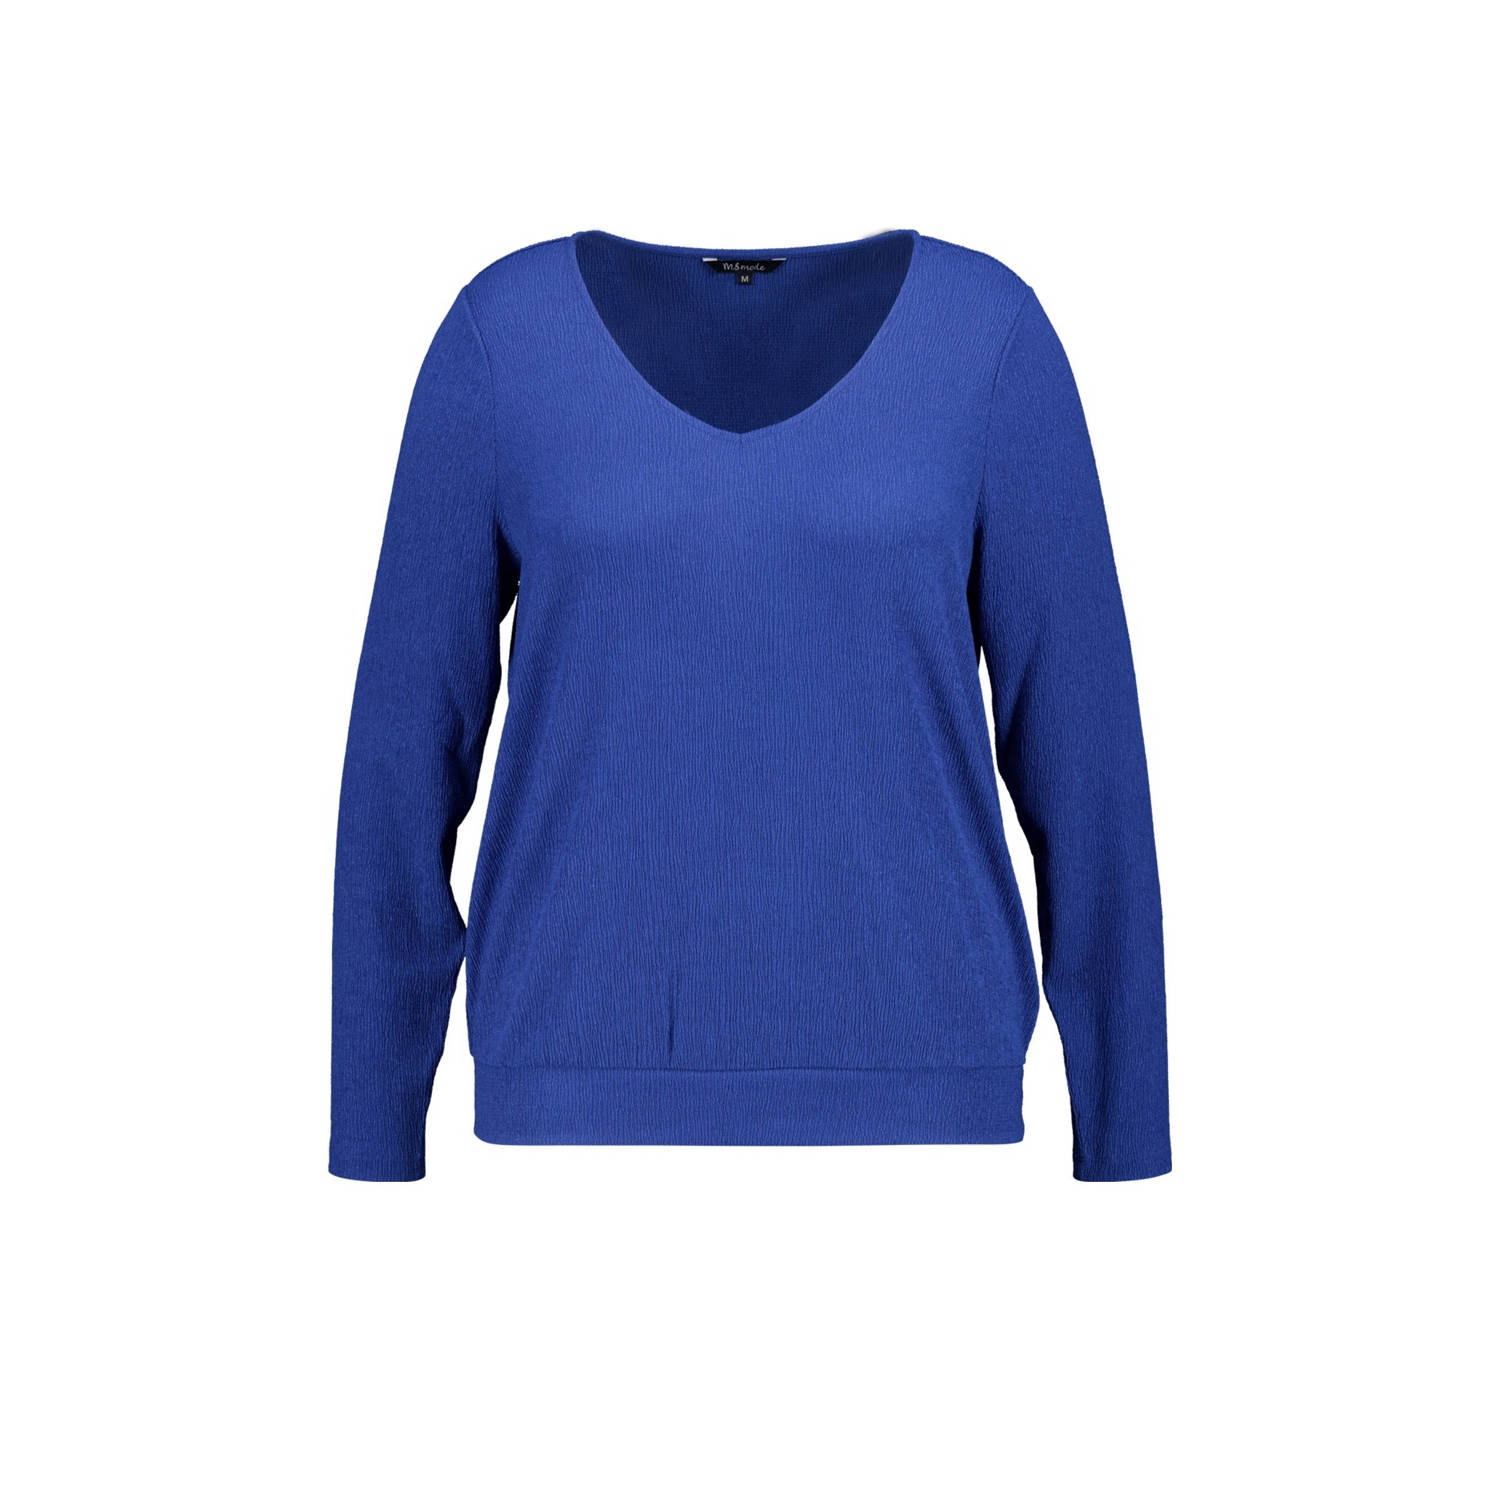 MS Mode top van gerecycled polyester blauw